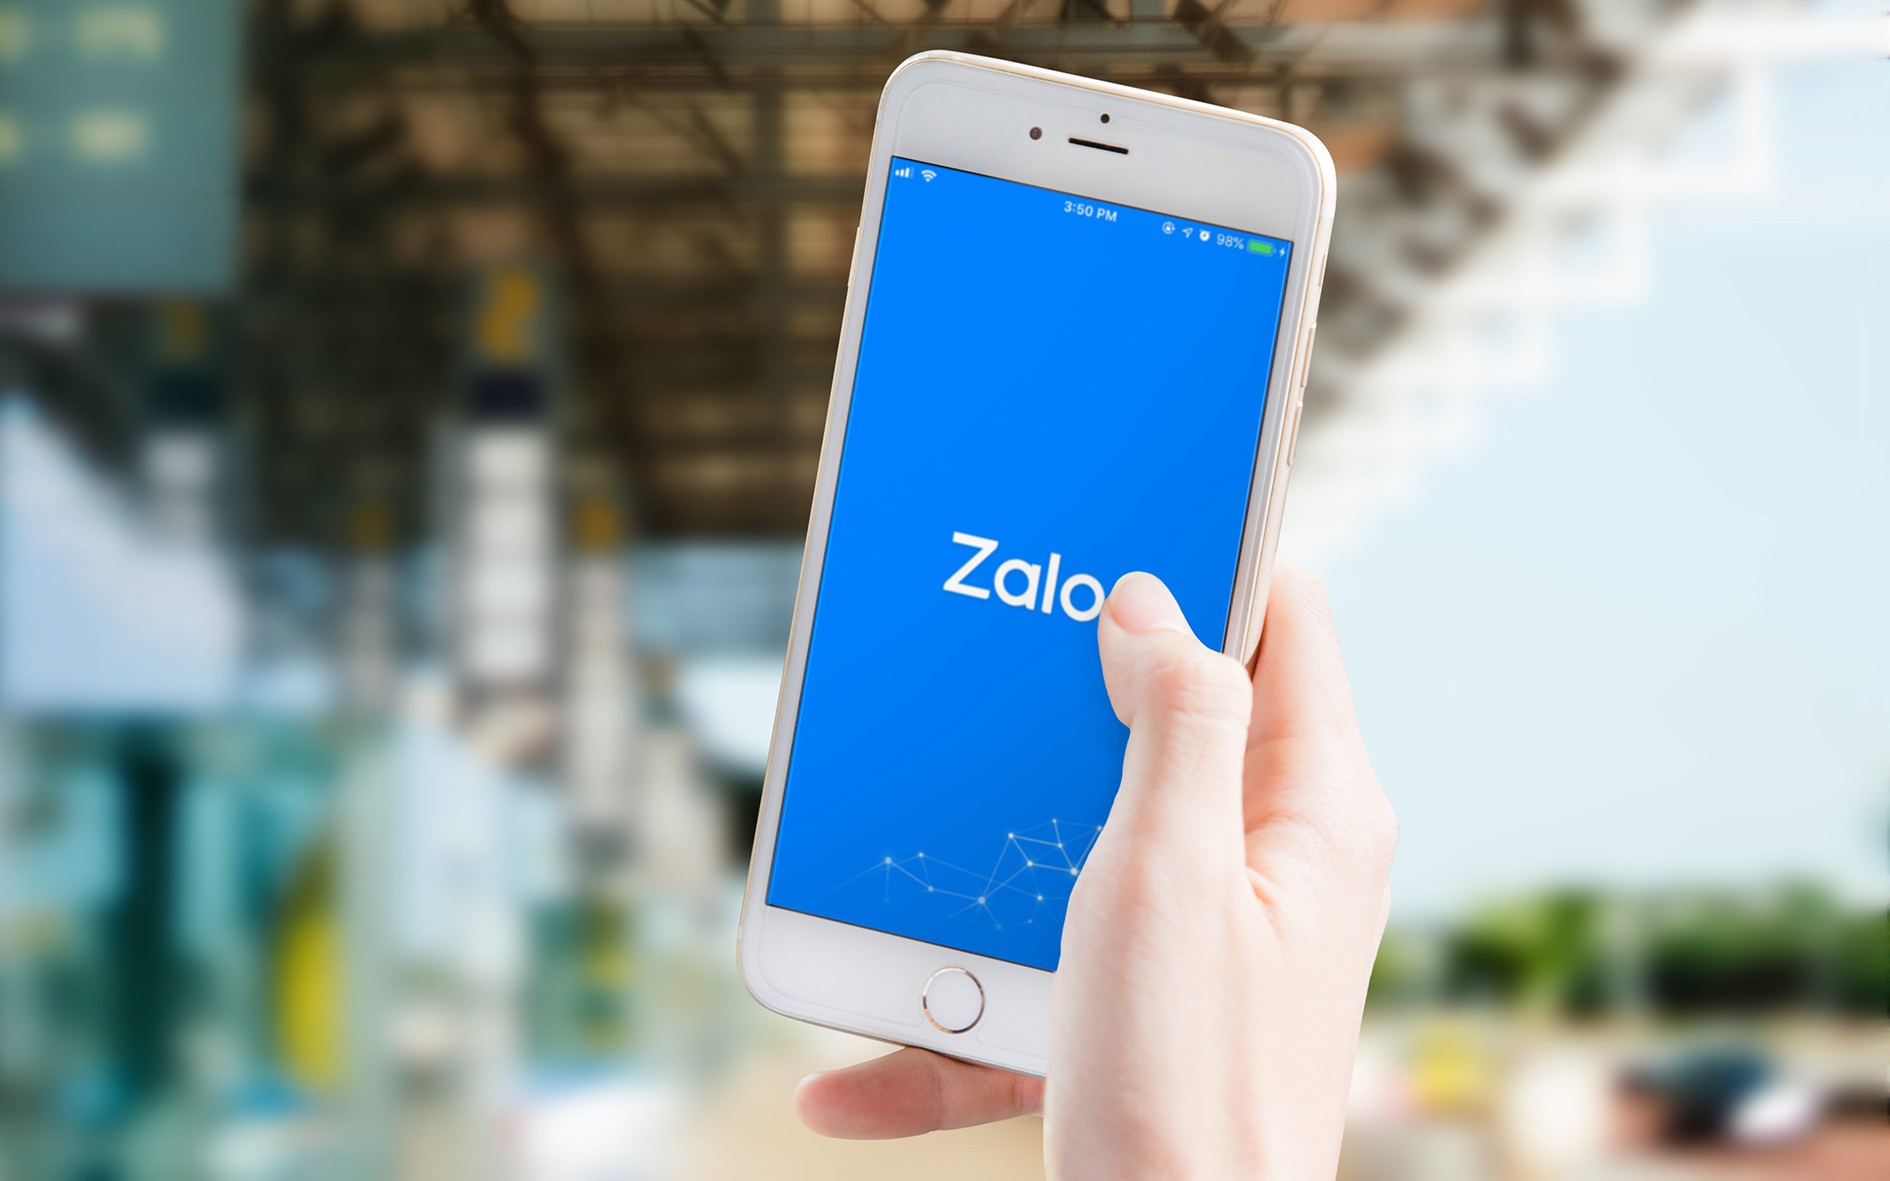 5 hidden features of Zalo extremely useful few people know